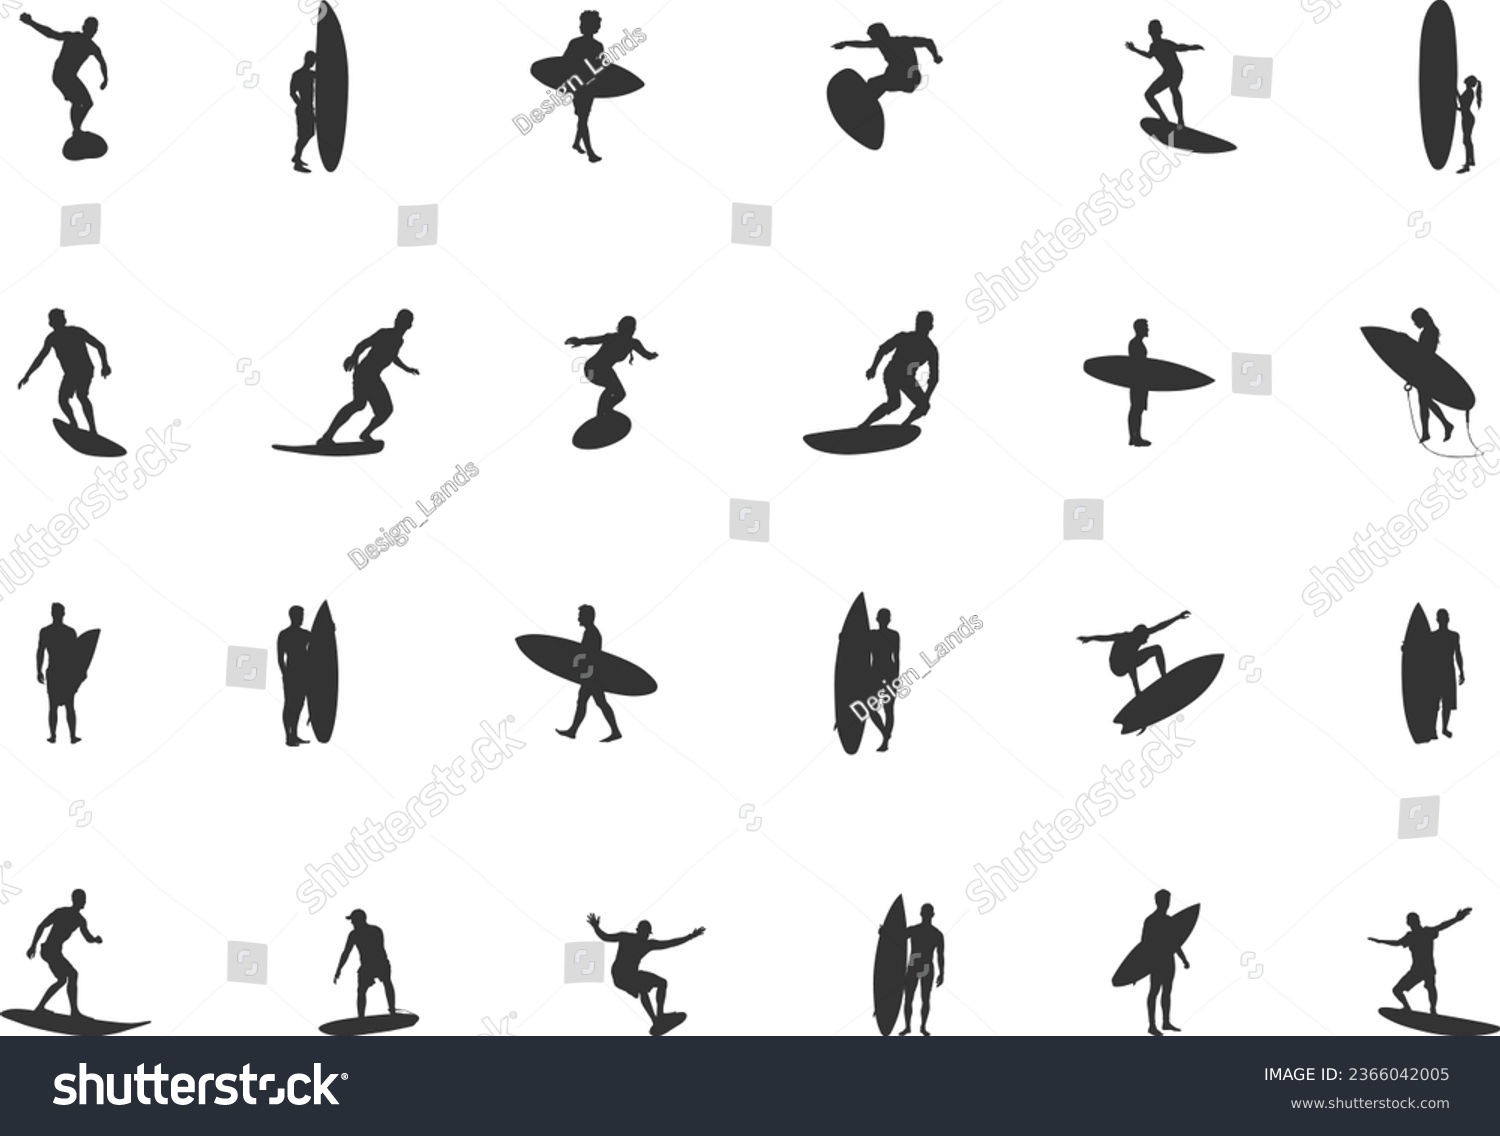 SVG of Surfing Silhouette, Surfer Silhouette, Surf Silhouette, Surfing Vector, Surfer Svg, Women Surfing Silhouette, Surfboarding Vector Silhouettes -V01. svg